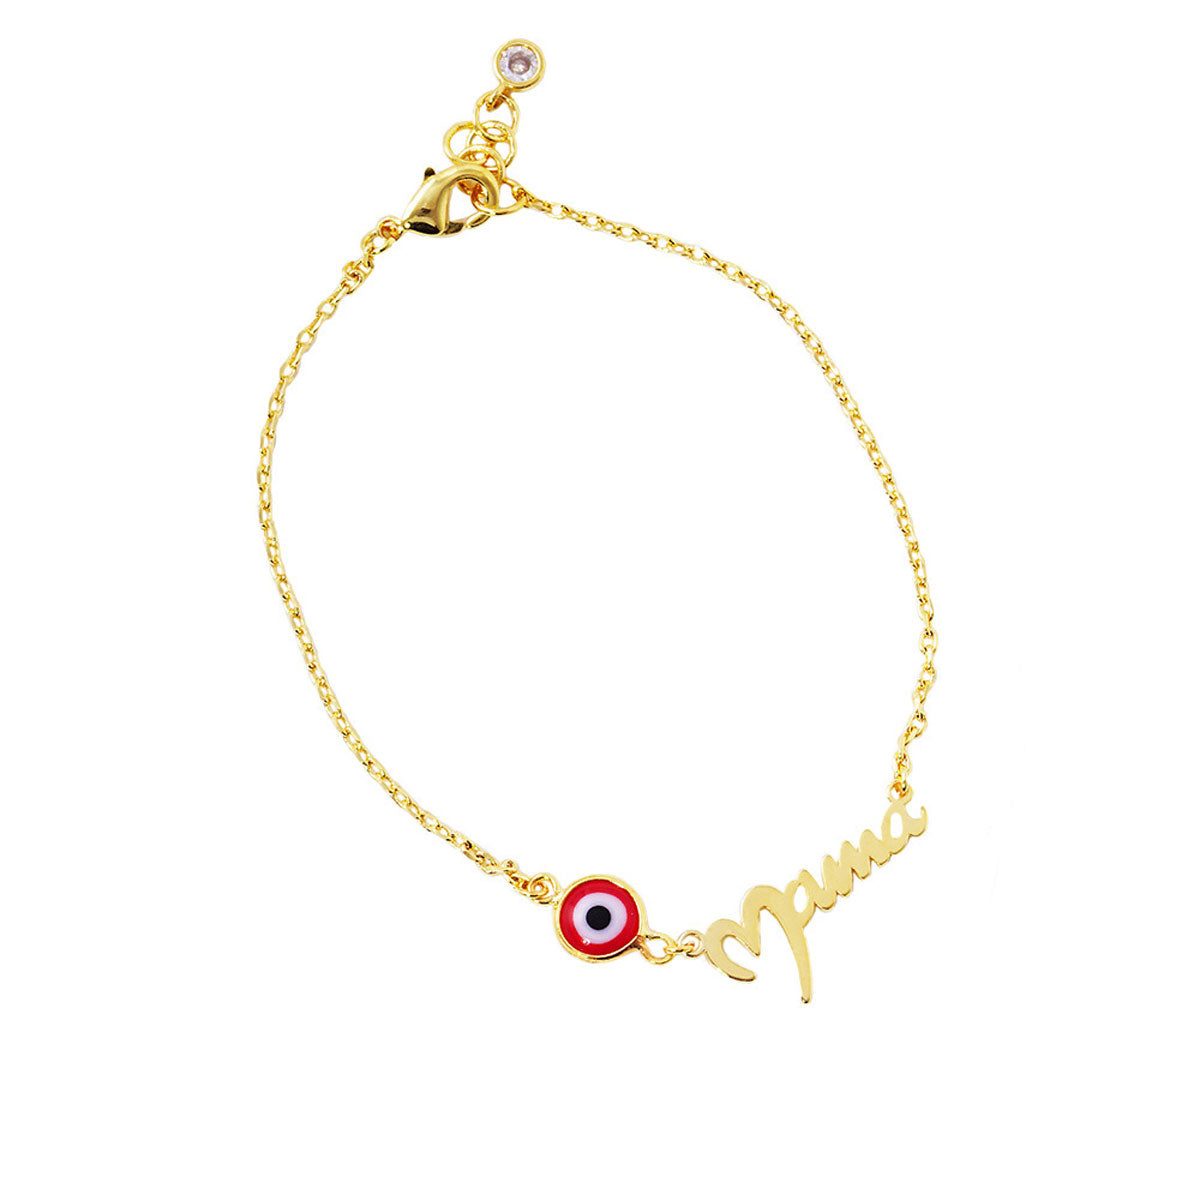 Red Evil Eye Pointed Gold Dipped Mama Metal Message Bracelet. Make your Mom feel special with this gorgeous Charm Bracelet gift! Her heart will swell with joy! Designed to add a gorgeous stylish glow to any outfit. Show mom how much she is appreciated & loved. This piece is versatile and goes with practically anything! This mom's bracelet is perfect Mother's Day gift for all the special women in your life, be it mother, wife, sister or daughter.